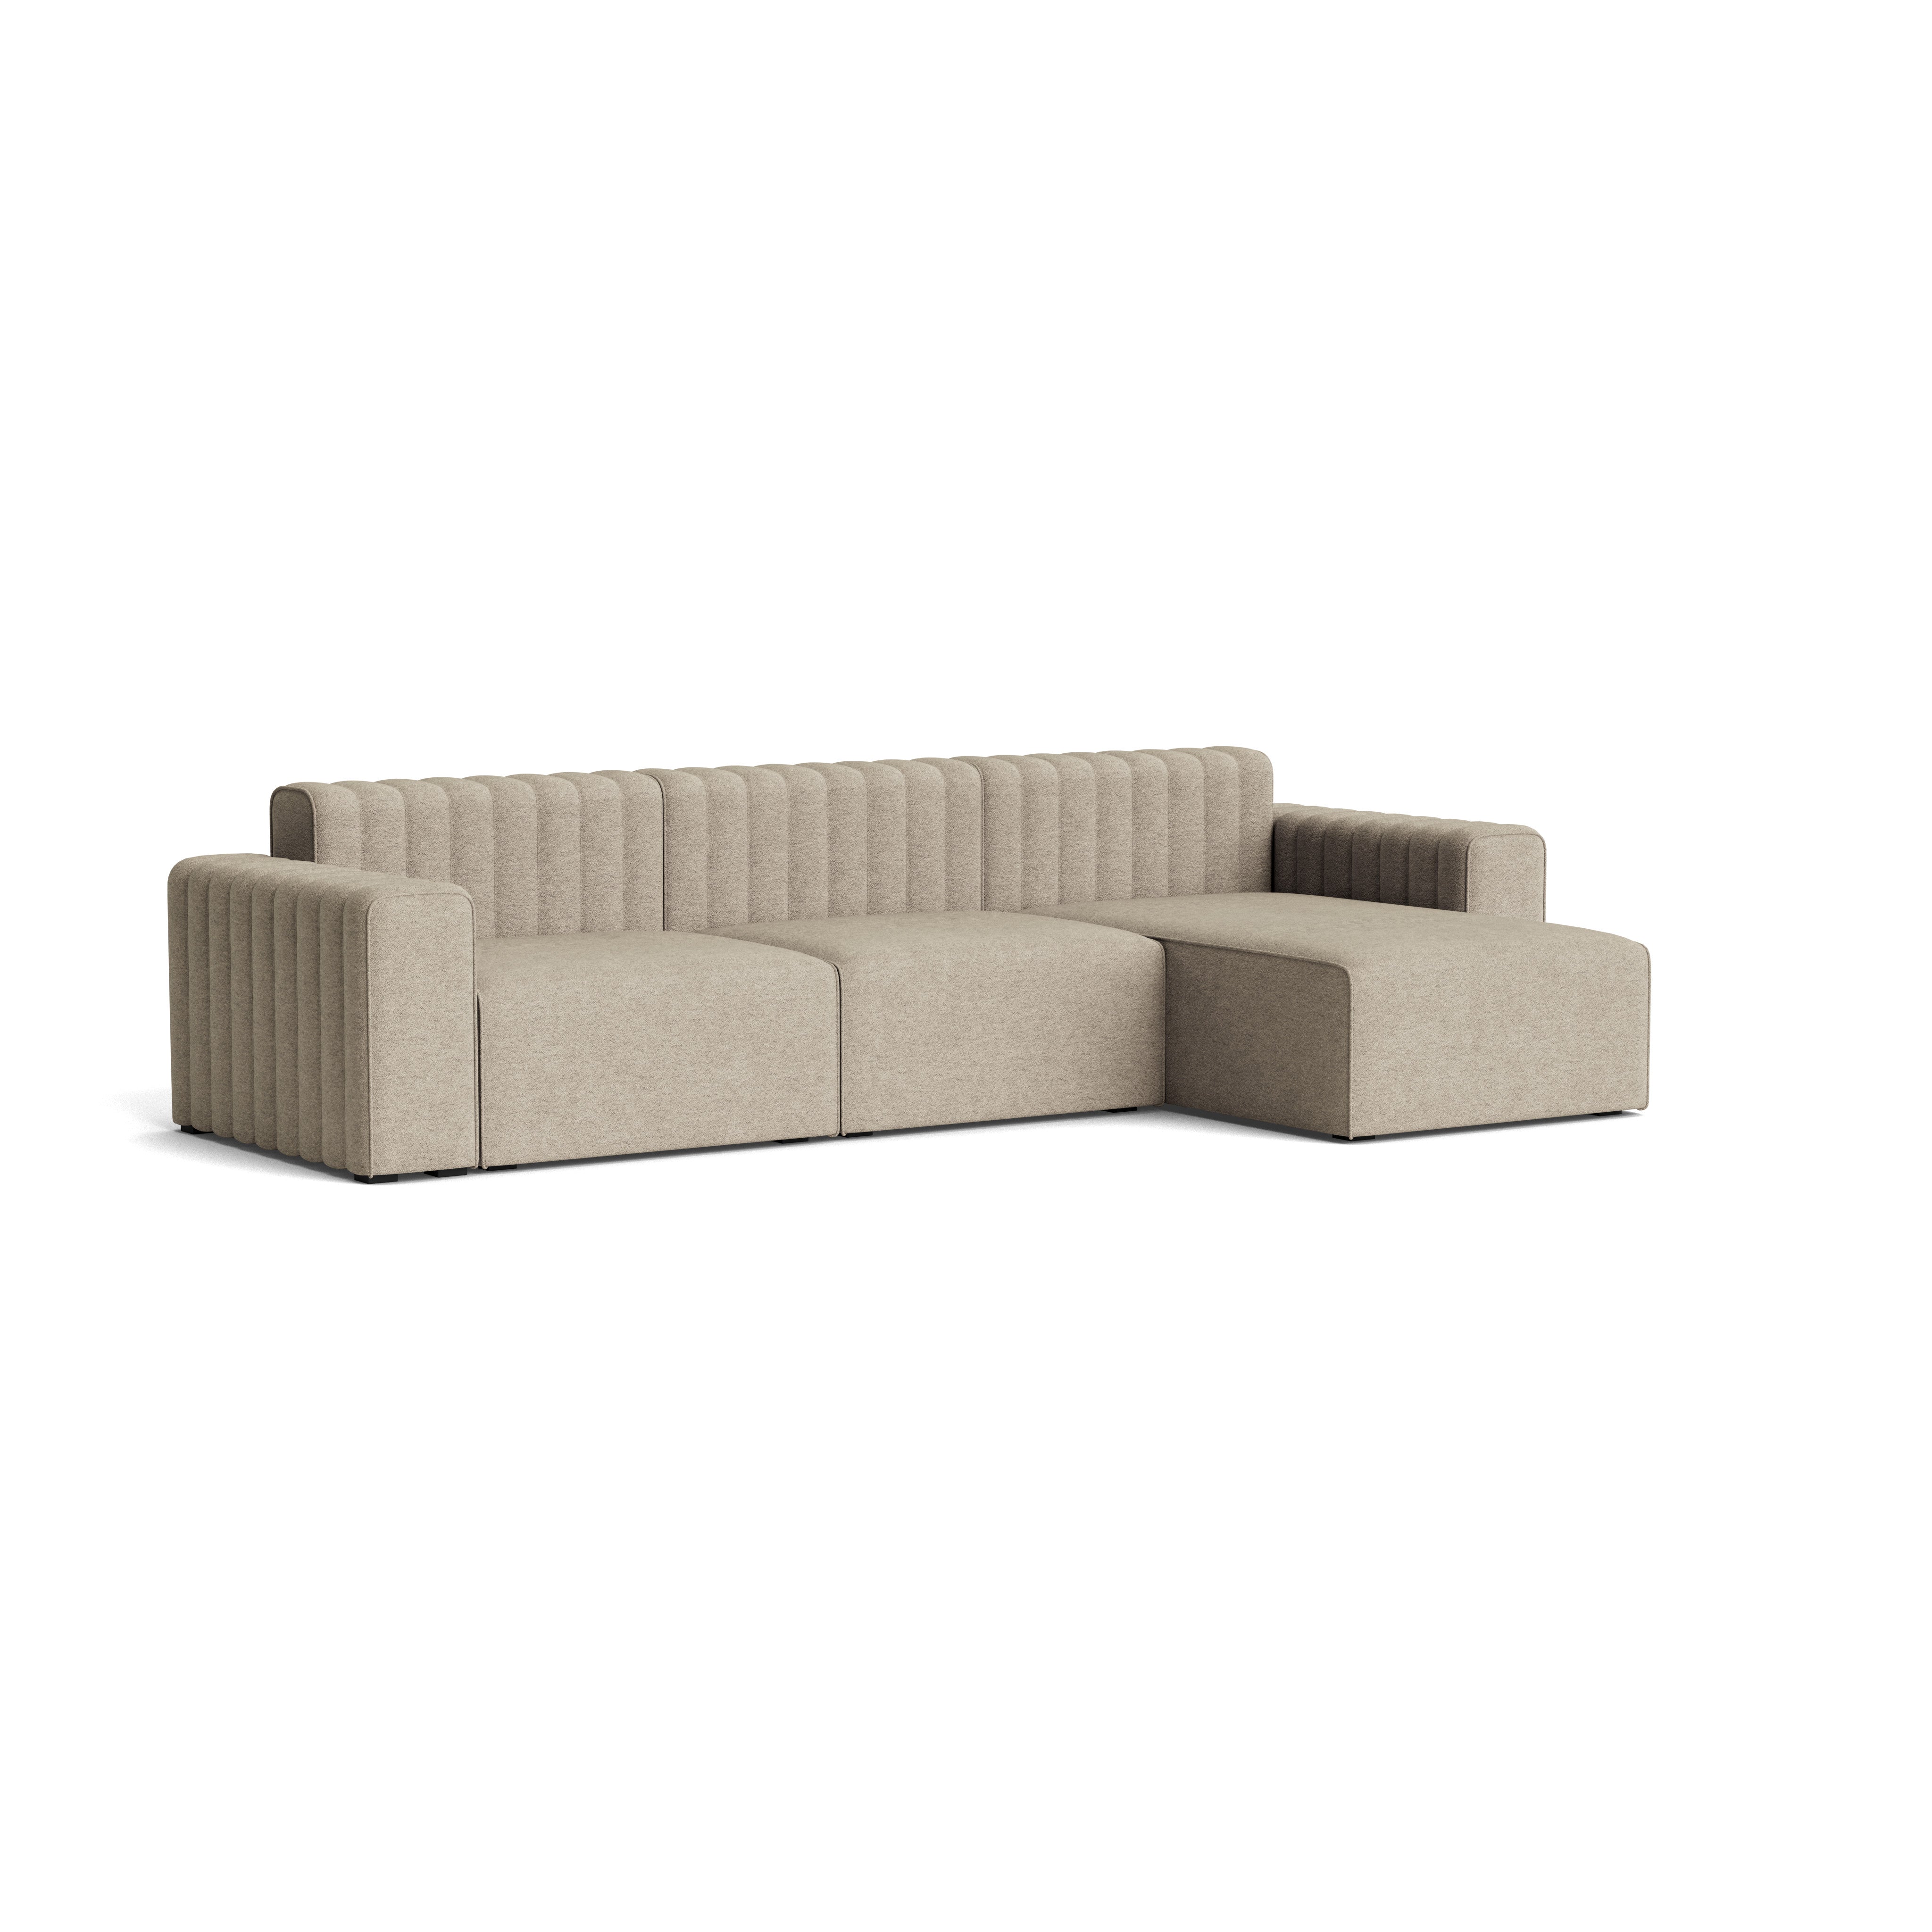 NORR11 RIFF Sofa - 3 Seater w/ Chaise Longue Left